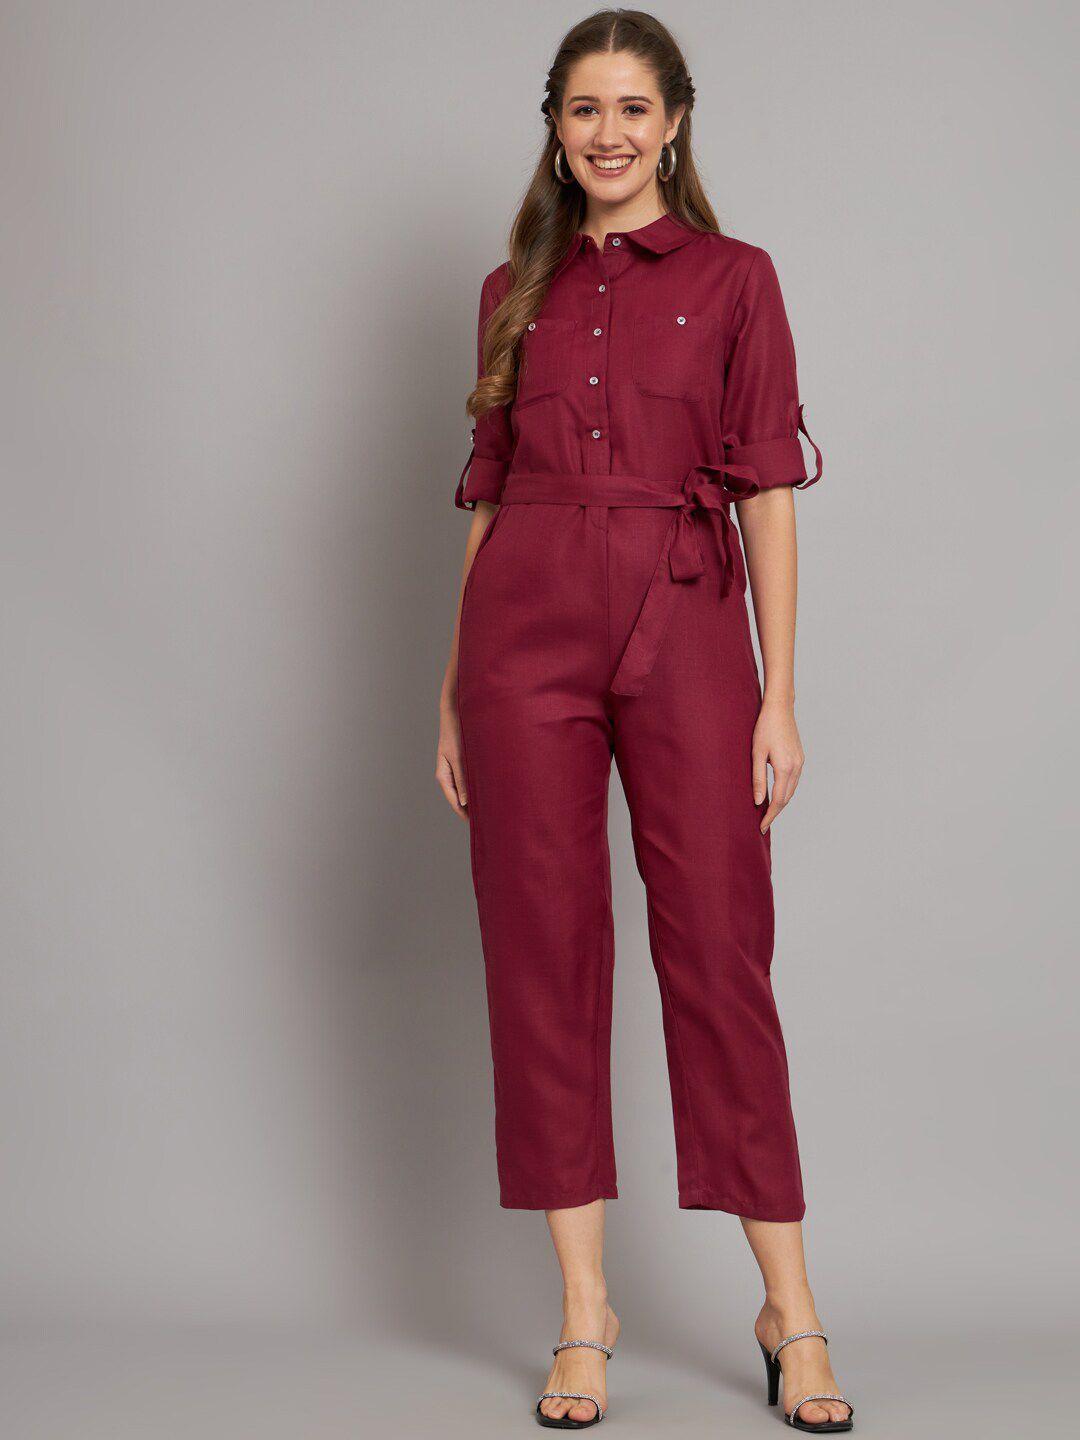 the dry state maroon waist tie-ups roll-up sleeves shirt collar cotton basic jumpsuit